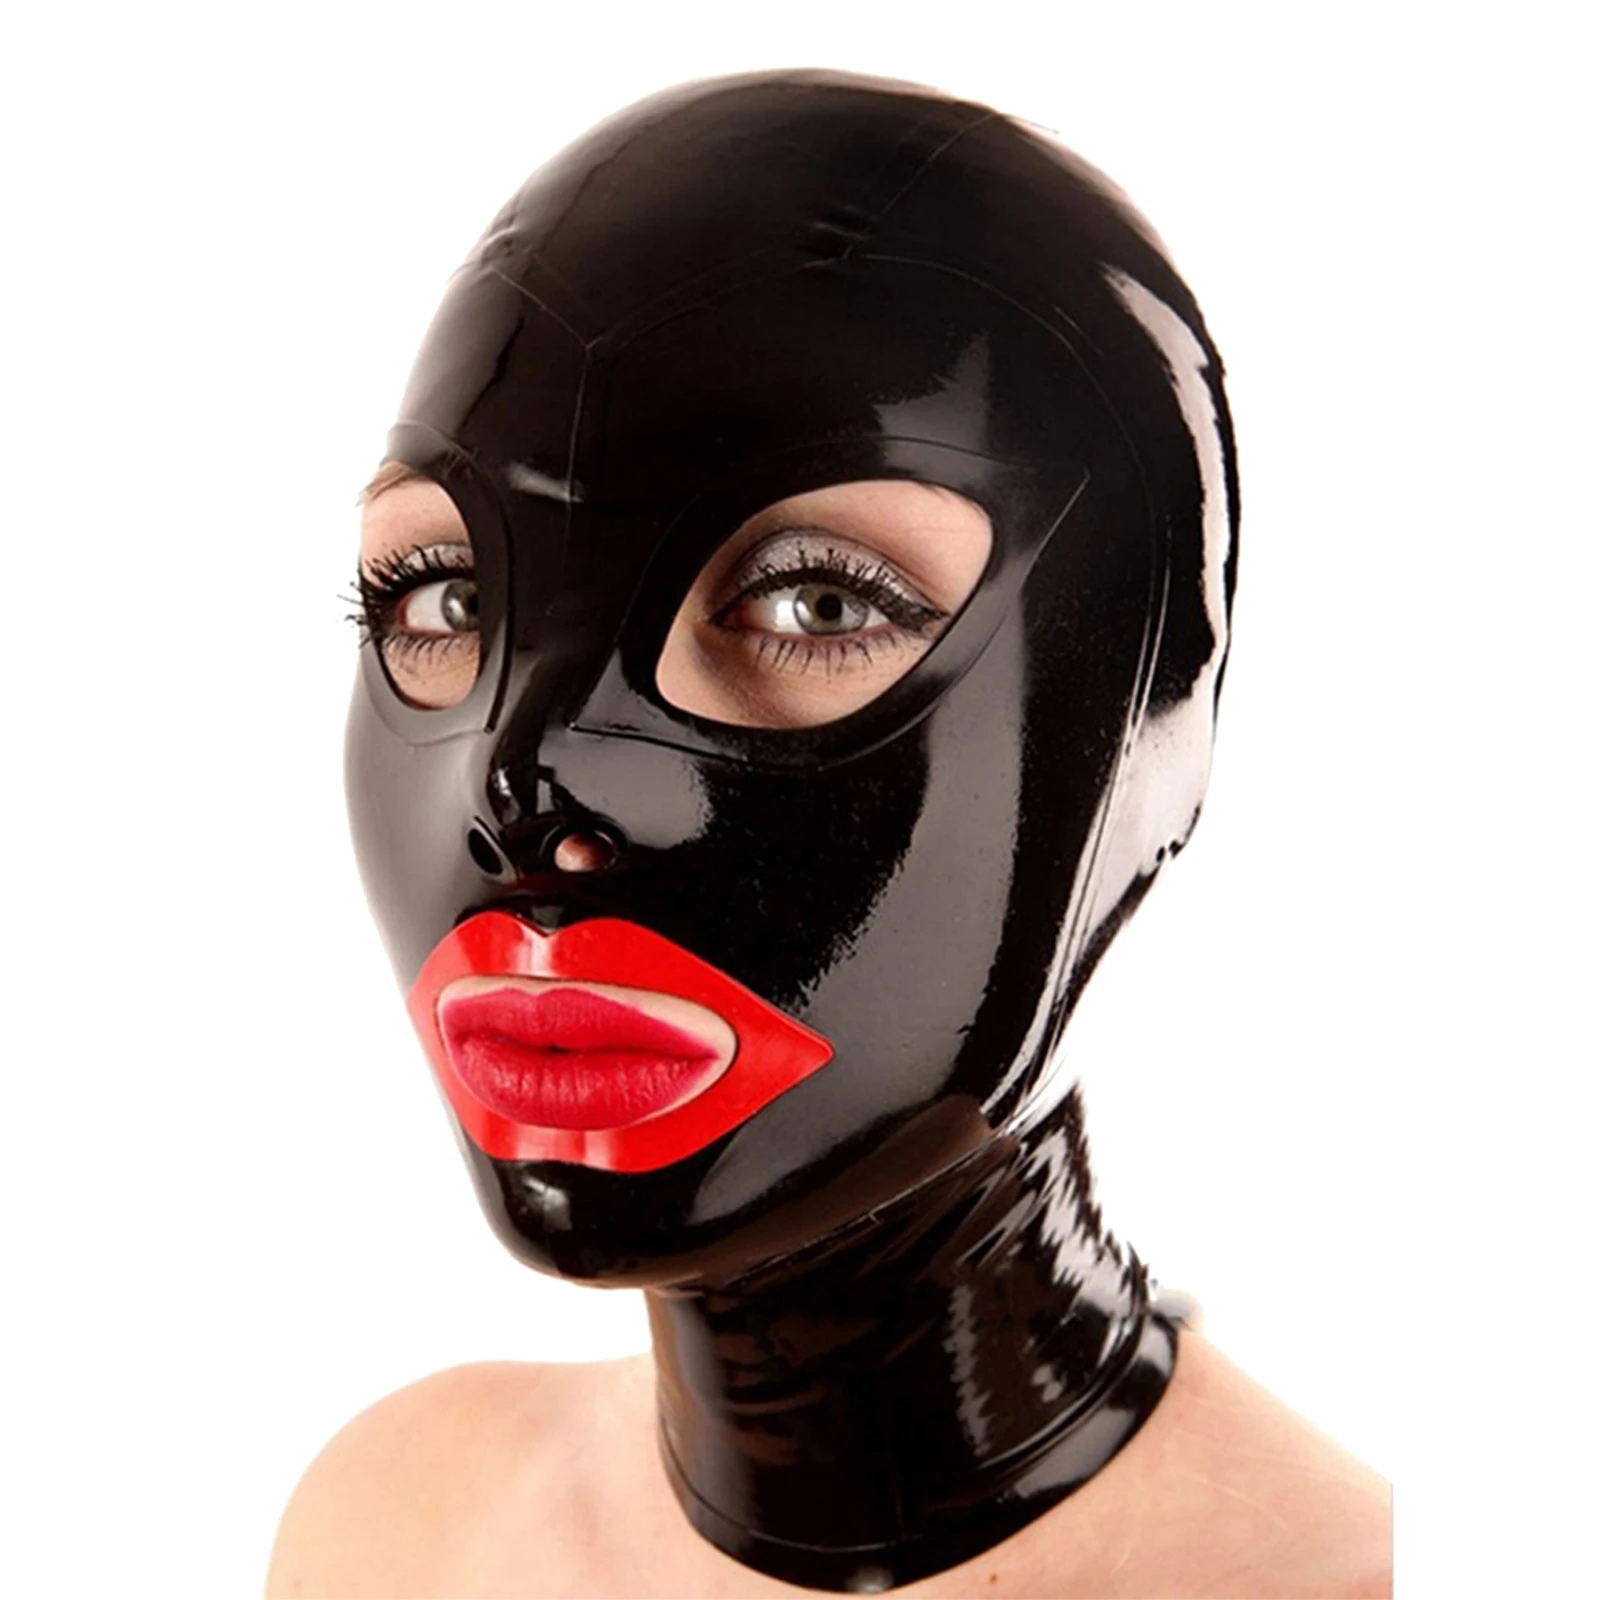 

Adult Full Cover Masks Open Eyes and Mouth Headgear Balaclava Latex Masks Face Mask Catsuit Accessory for Couple Game Clubwear